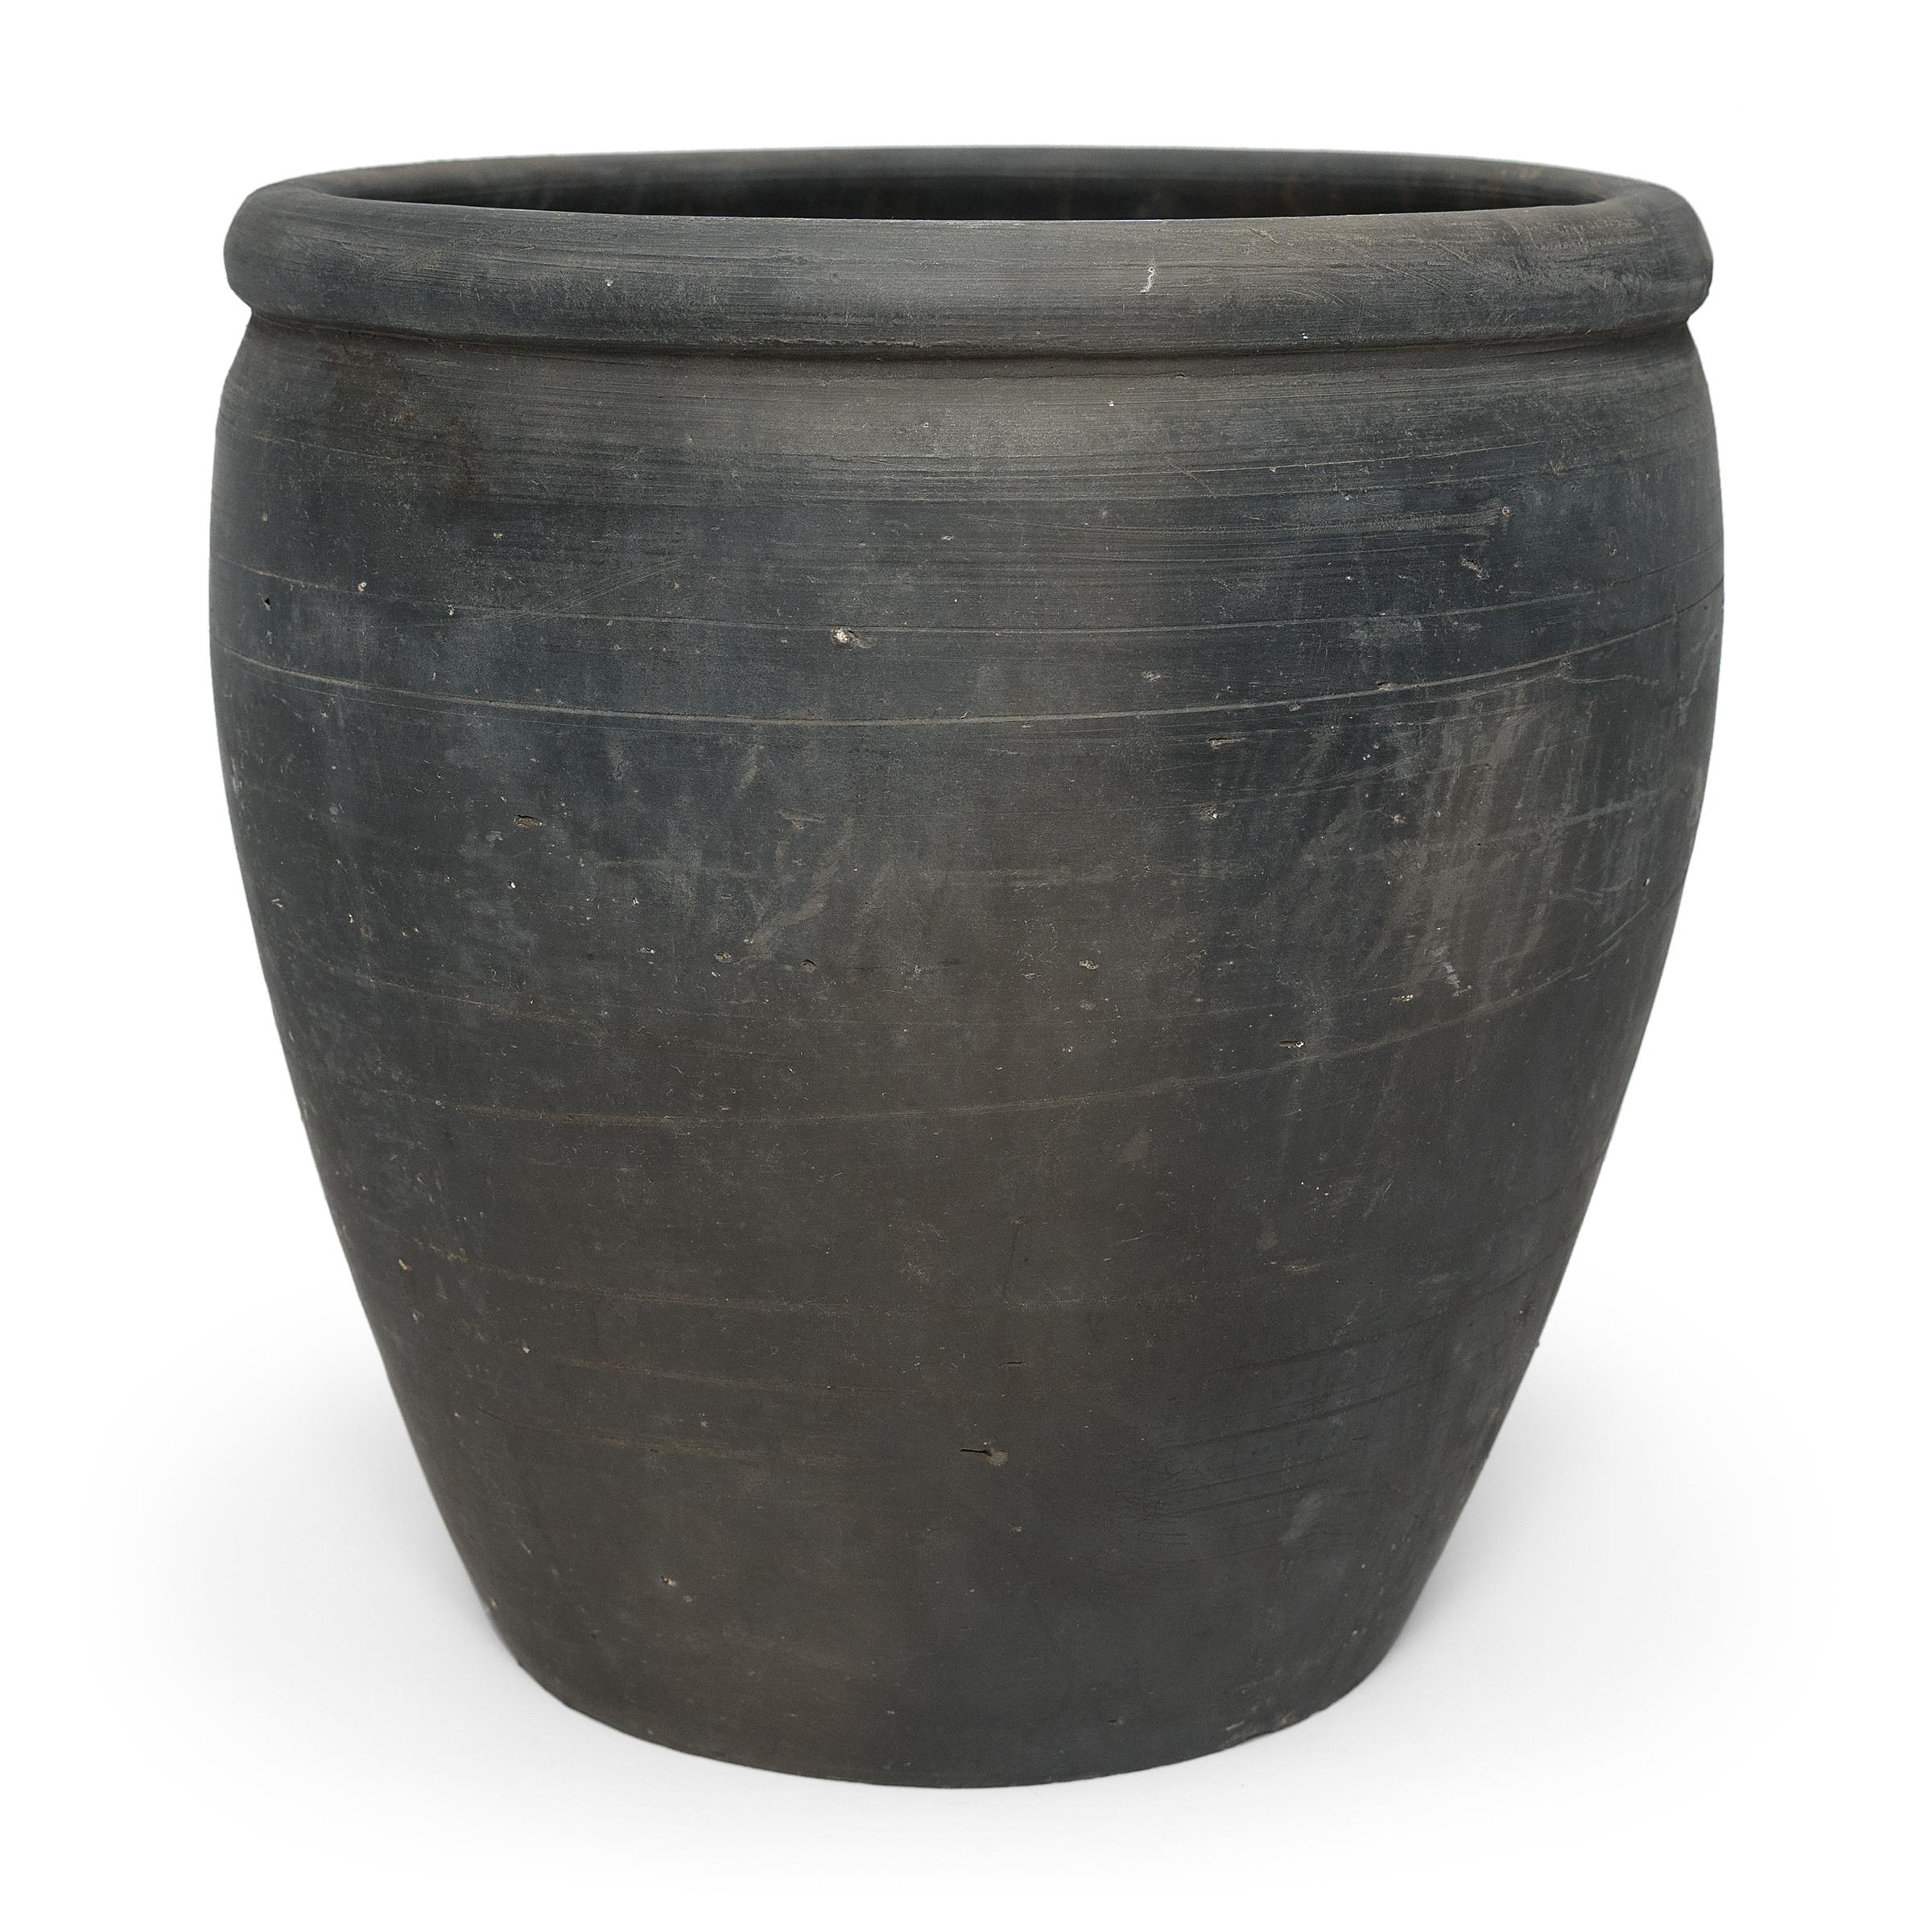 Sculpted by artisans in China's Shanxi province, this black clay vessel has a quiet simplicity, shaped with balanced proportions and an undecorated, unglazed surface. Charged with the humble task of storing dry goods, the earthenware jar has a wide